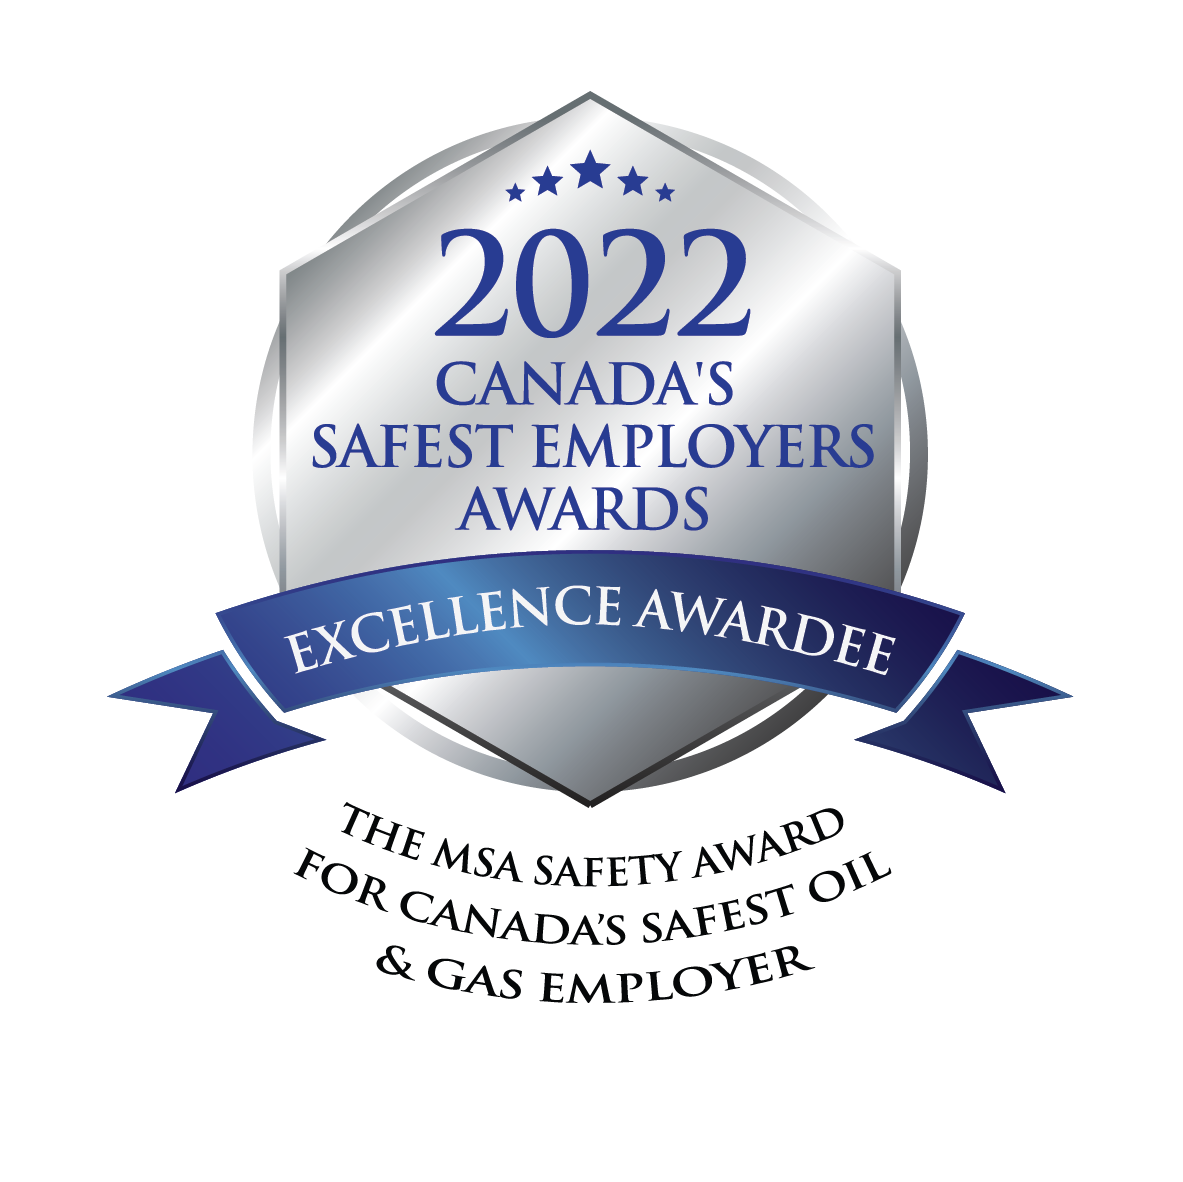 CSEA22 - Silver EA Medal_The MSA Safety Award for Canada’s Safest Oil & Gas Employer.png